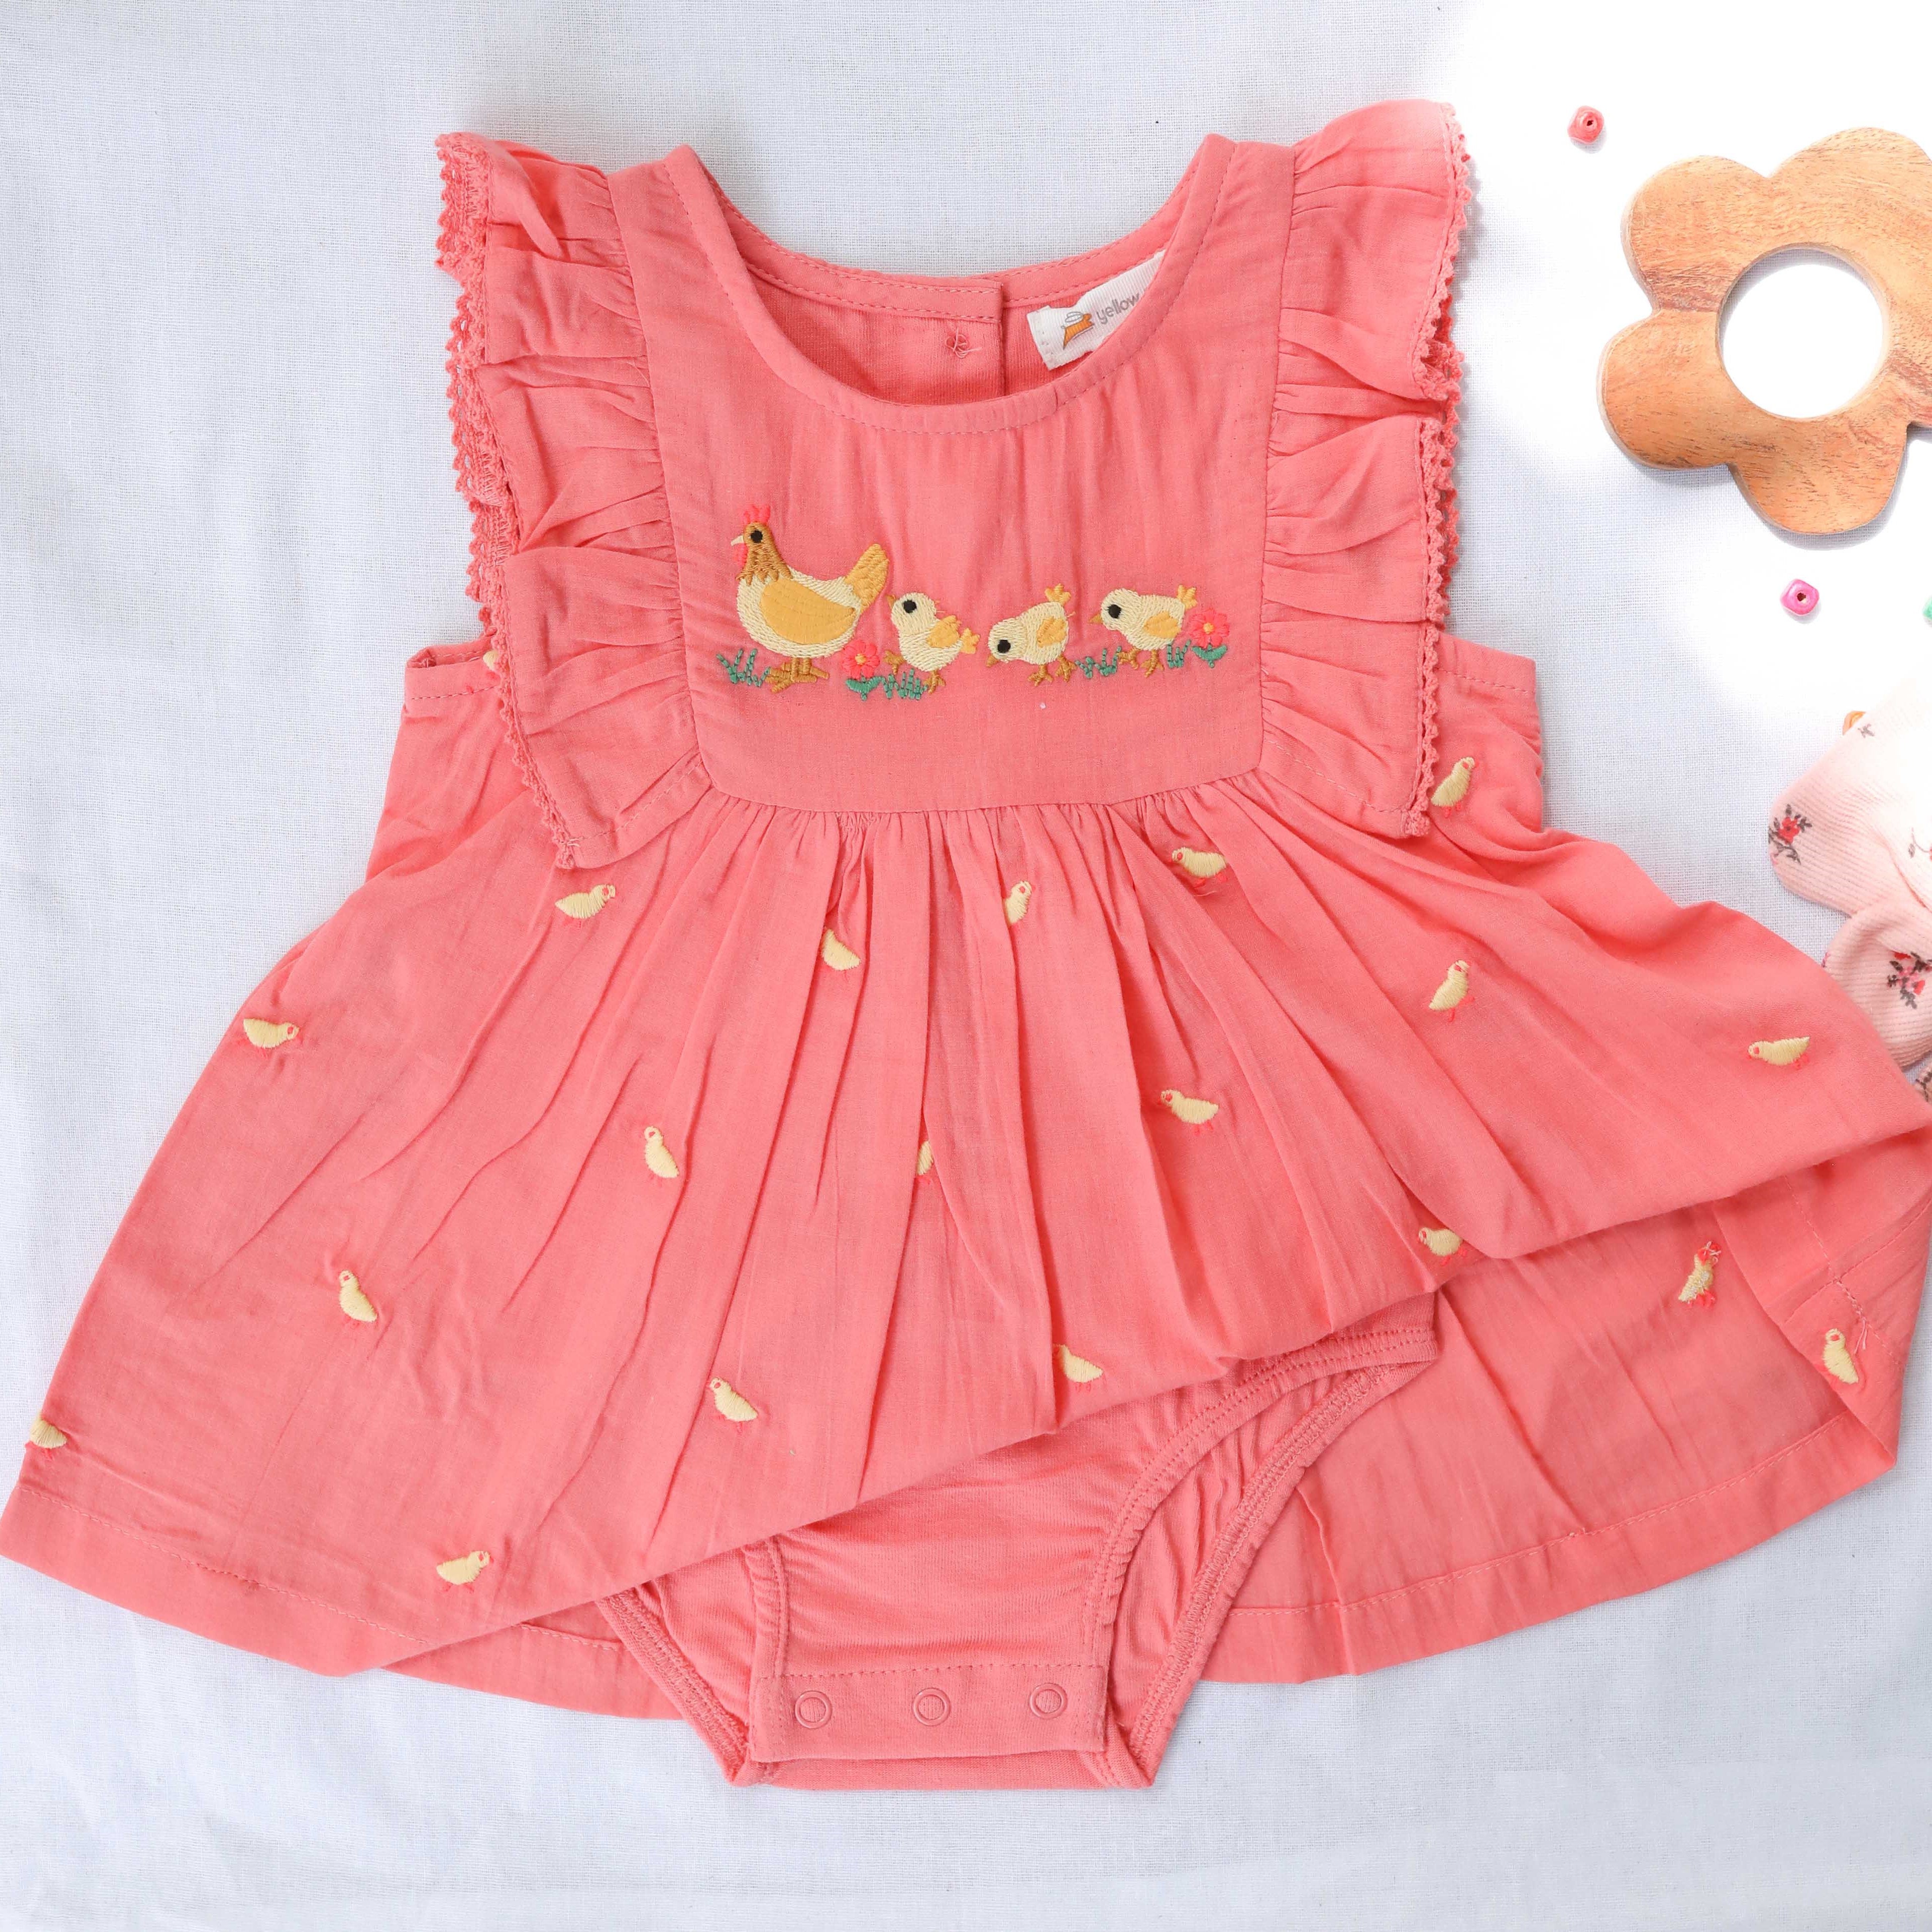 Coral Chic Dress